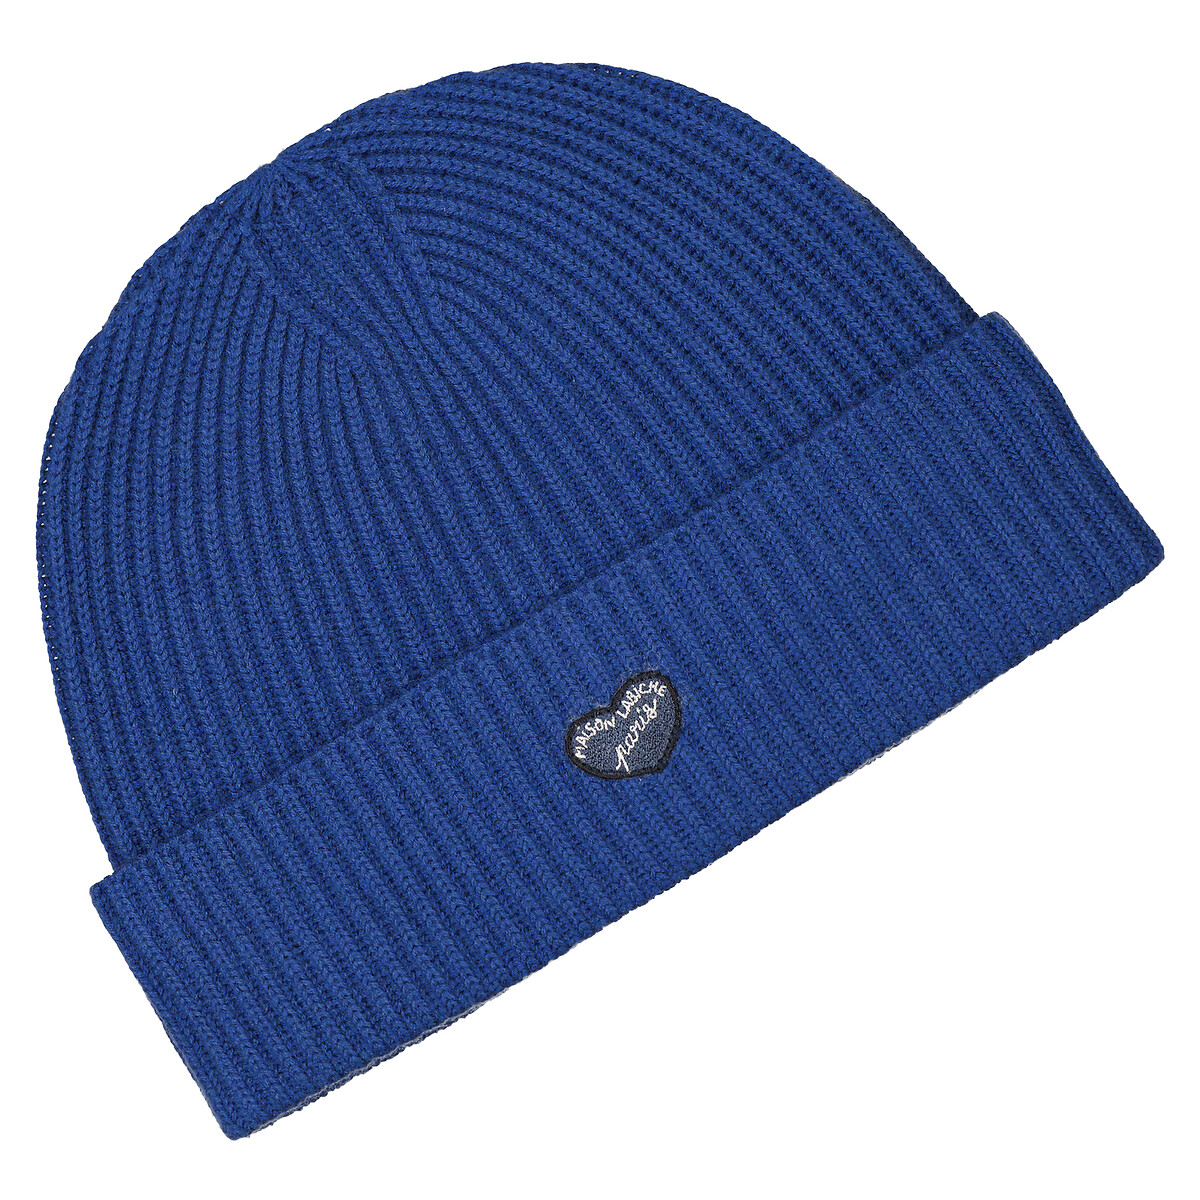 Vincennes Ribbed Wool Beanie with Turn-Up